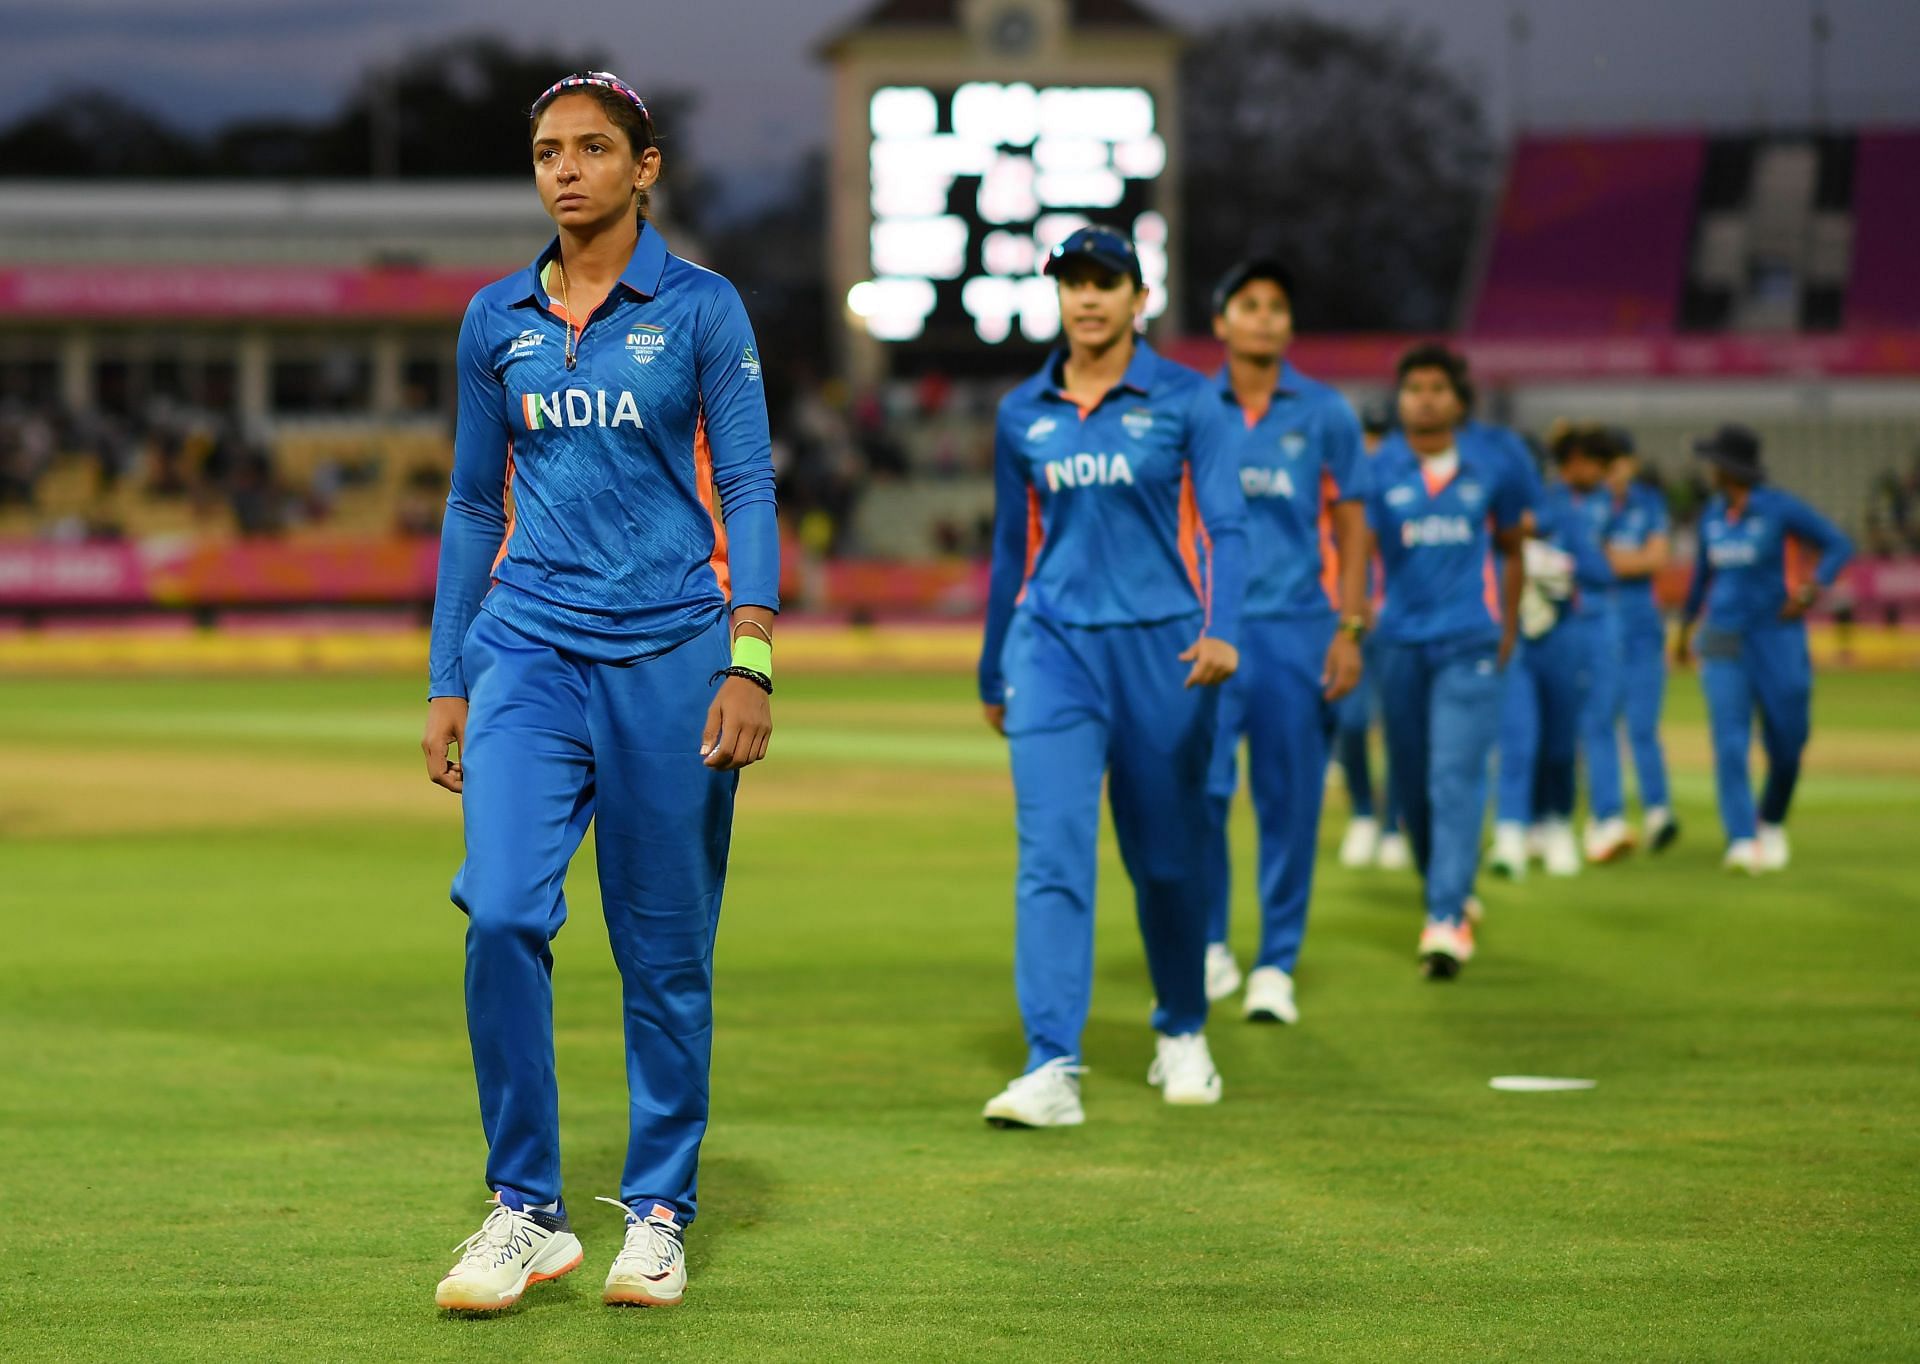 Women&#039;s T20 Commonwealth Games Dream11 Fantasy Suggestions